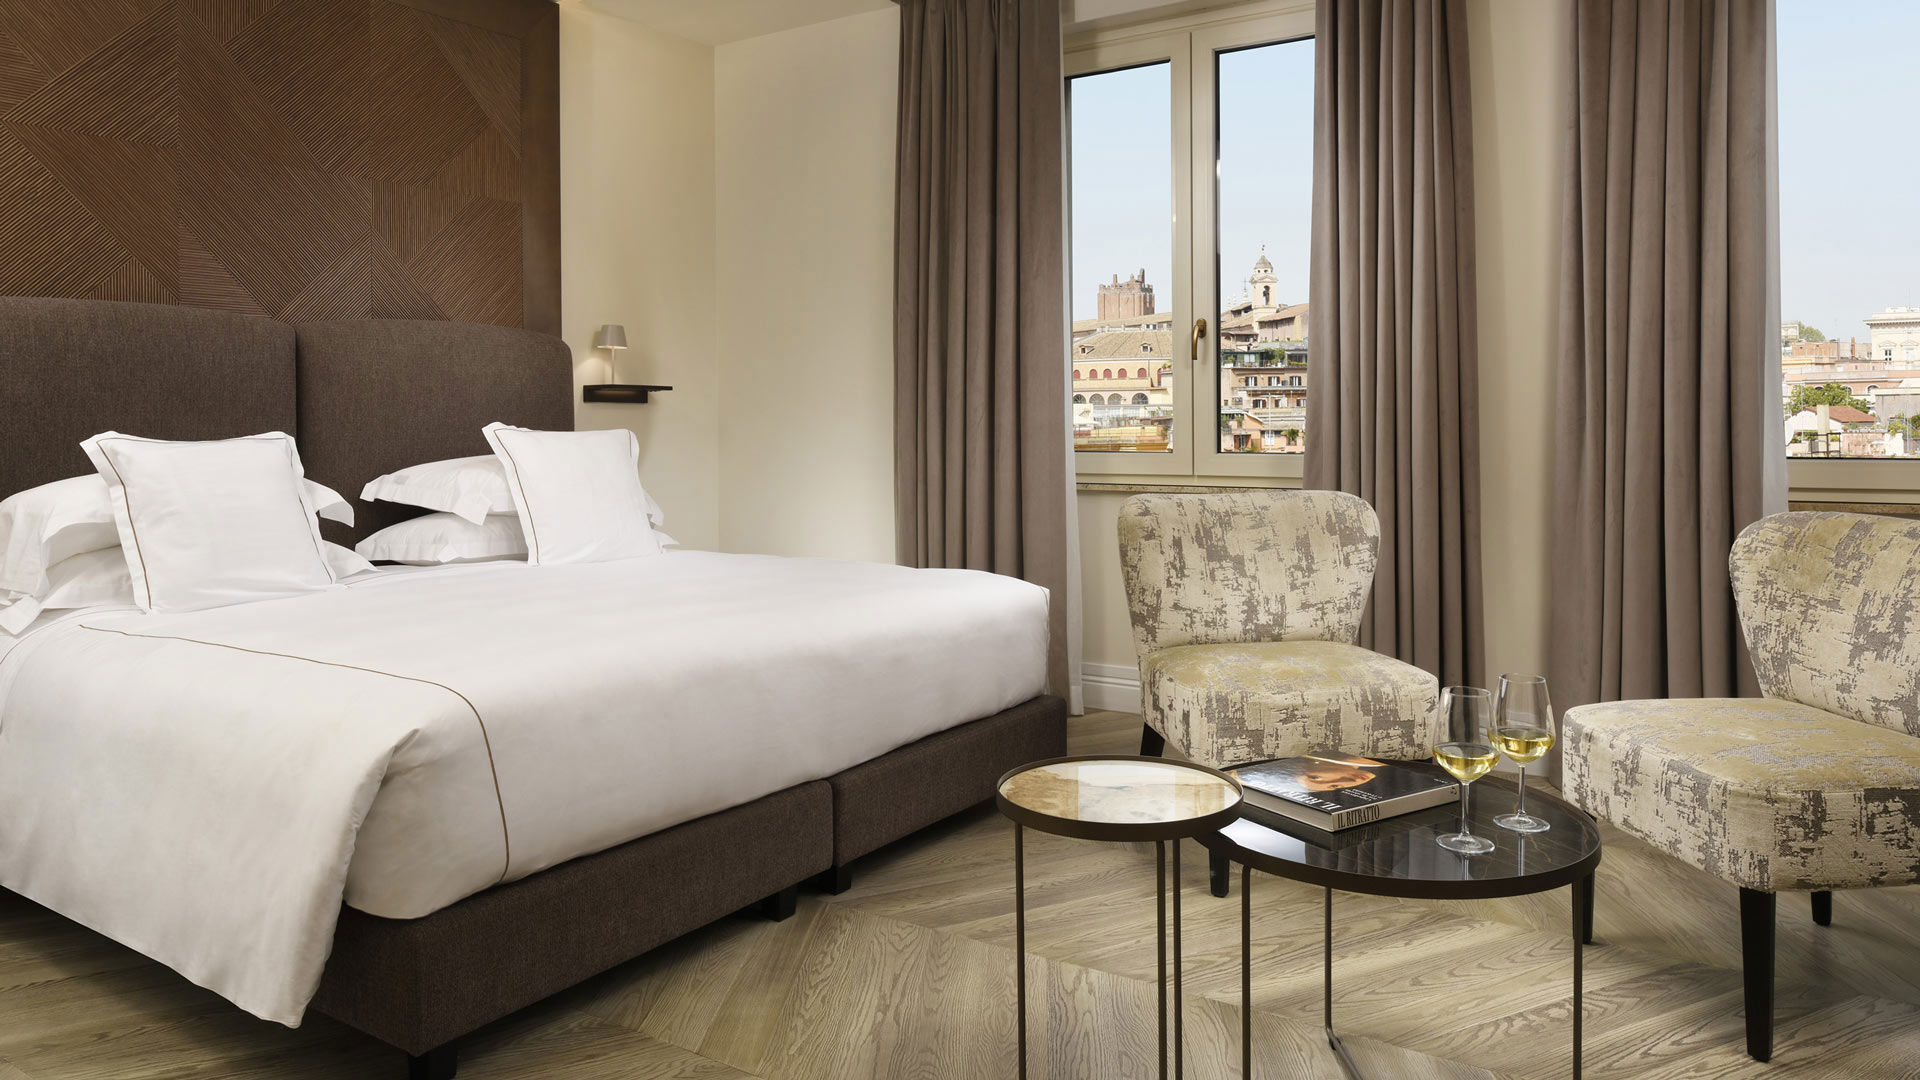 Grand Hotel Palatino - Rooms in Rome Italy 4